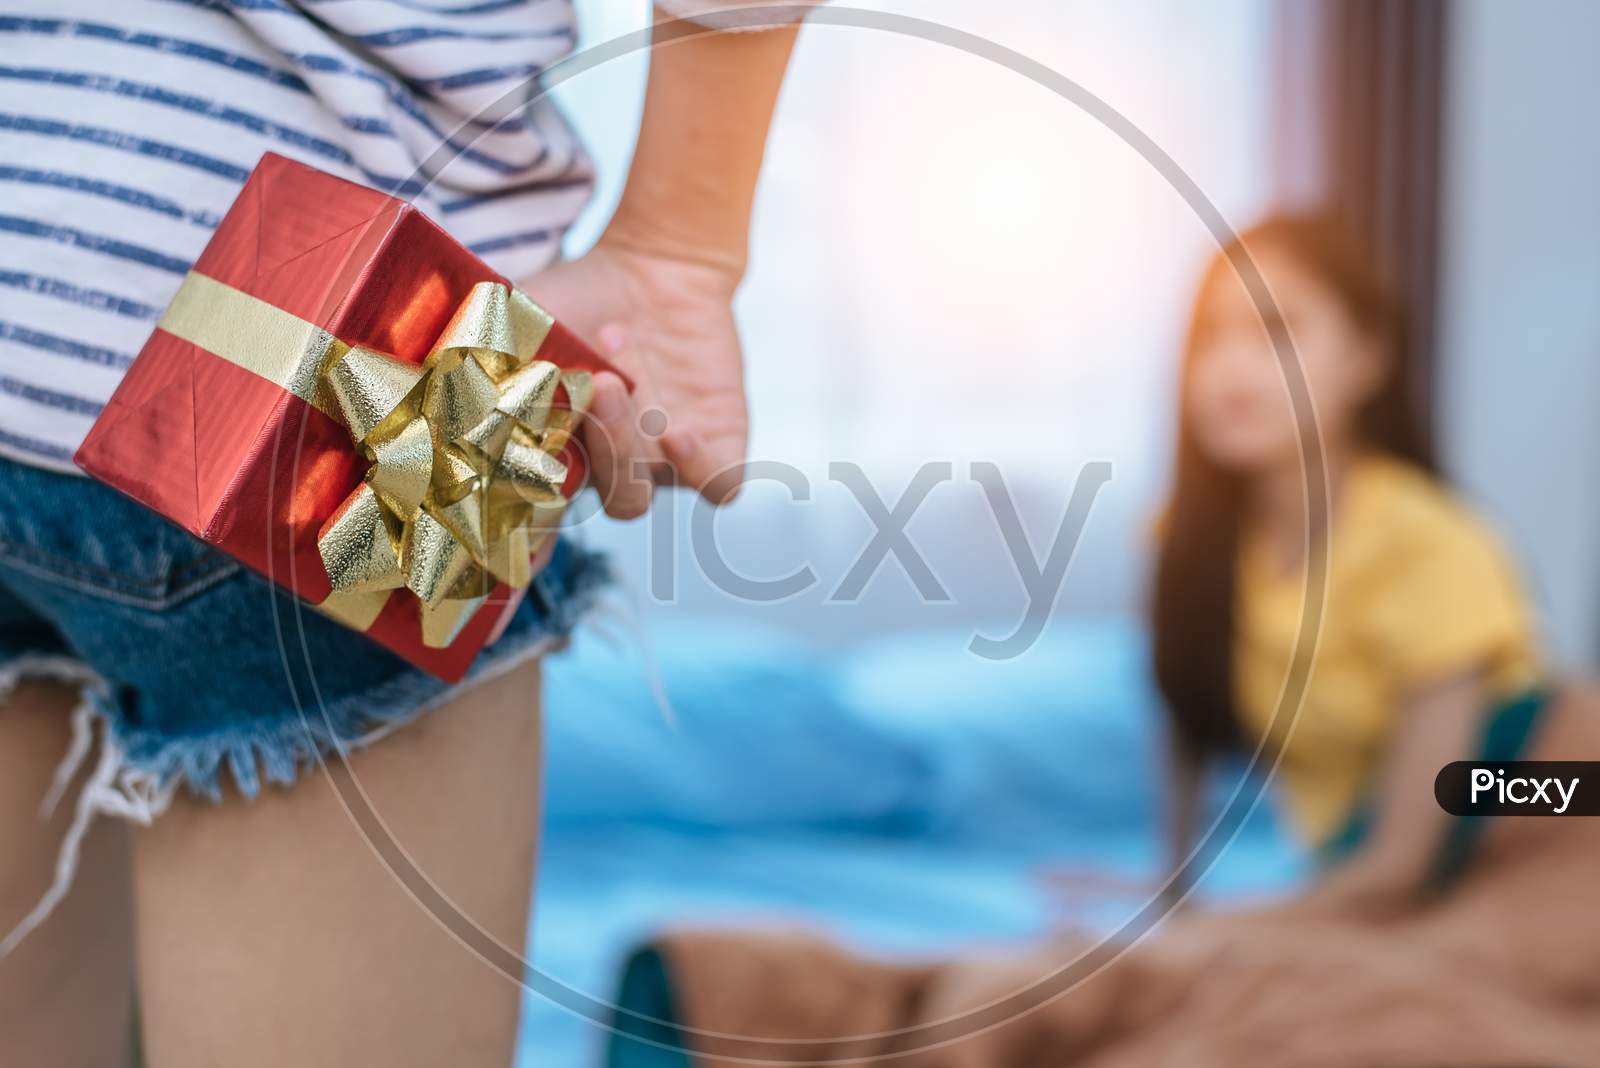 Close Up Of Woman Hands Holding Gift For Surprise Her Girlfriend In Bedroom. Person And People Concept. Lifestyles And Happiness Life Concept. Lesbian And Homosexual Theme.